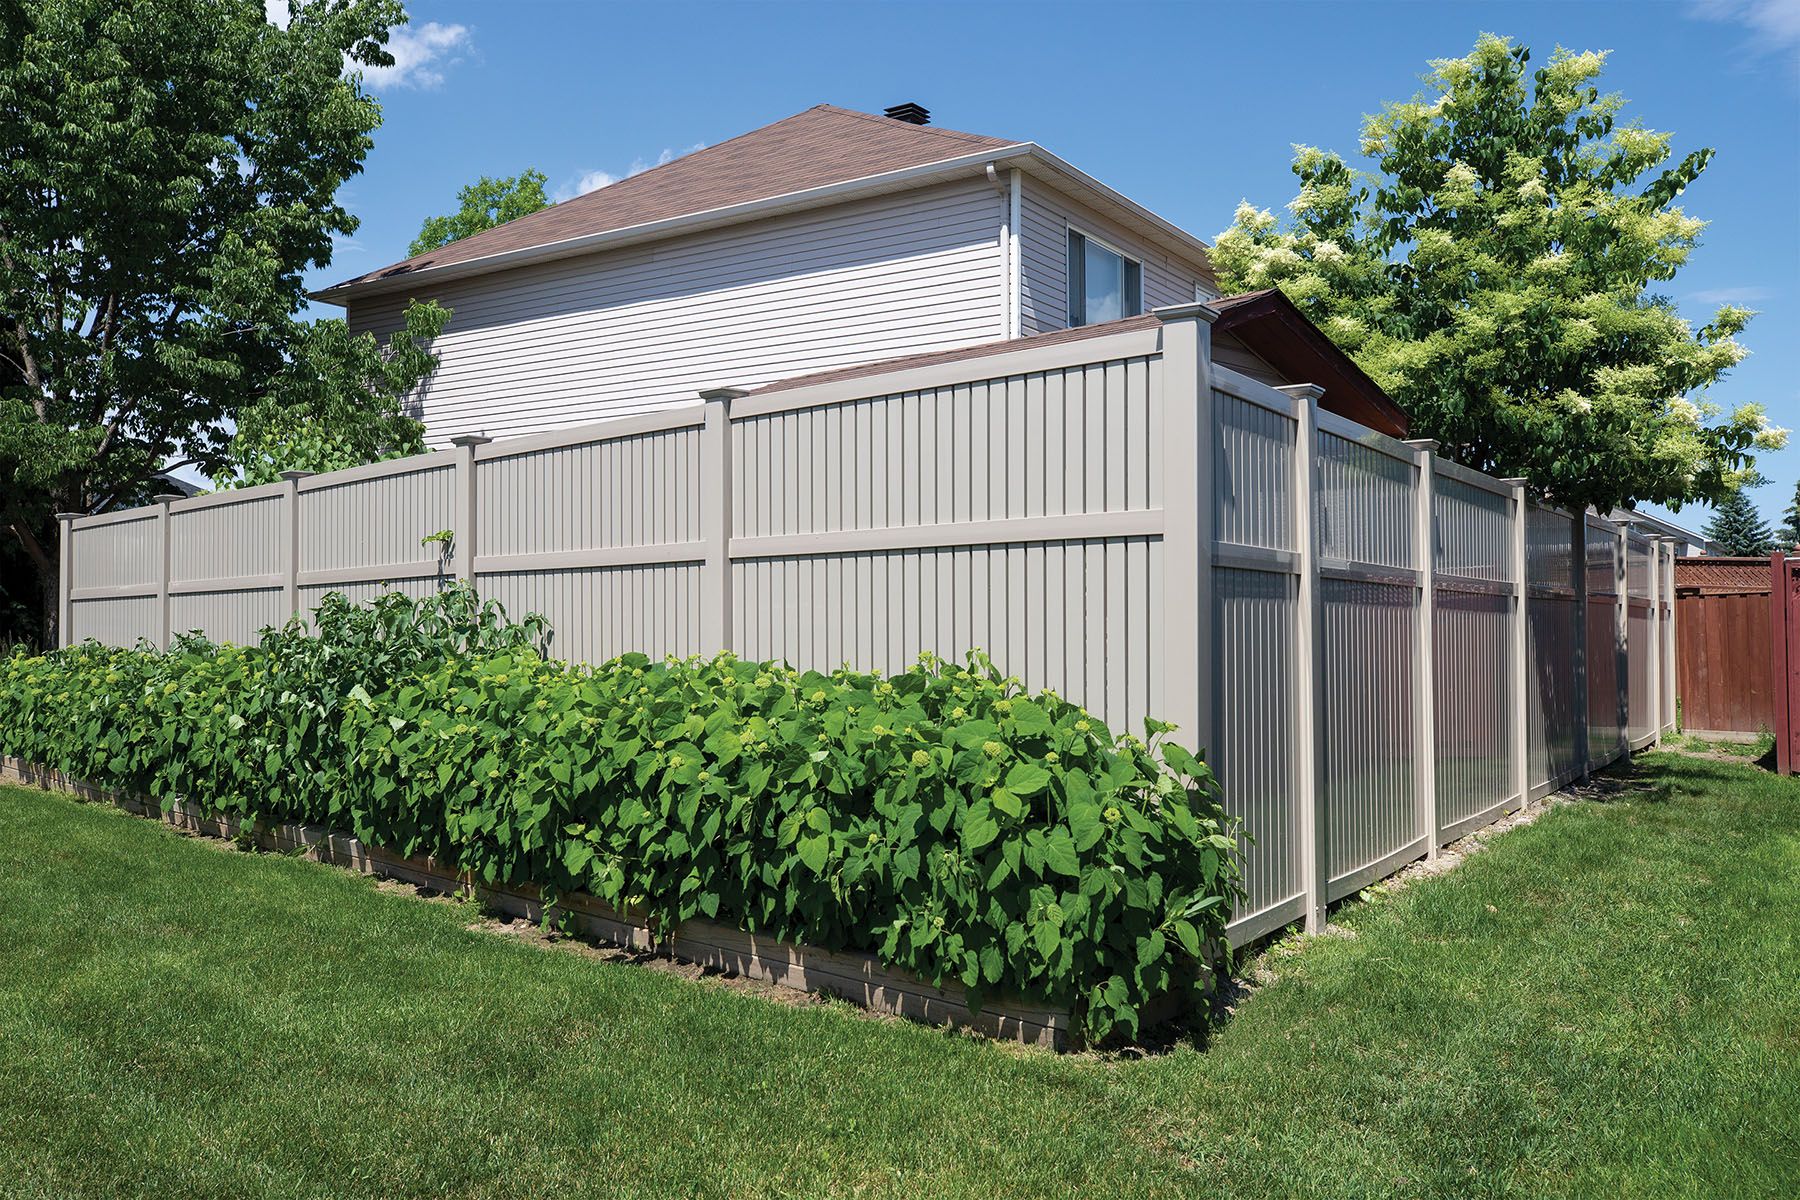 How high can I build my fence? Whats the best type of budget fencing? Ottawa Citizen